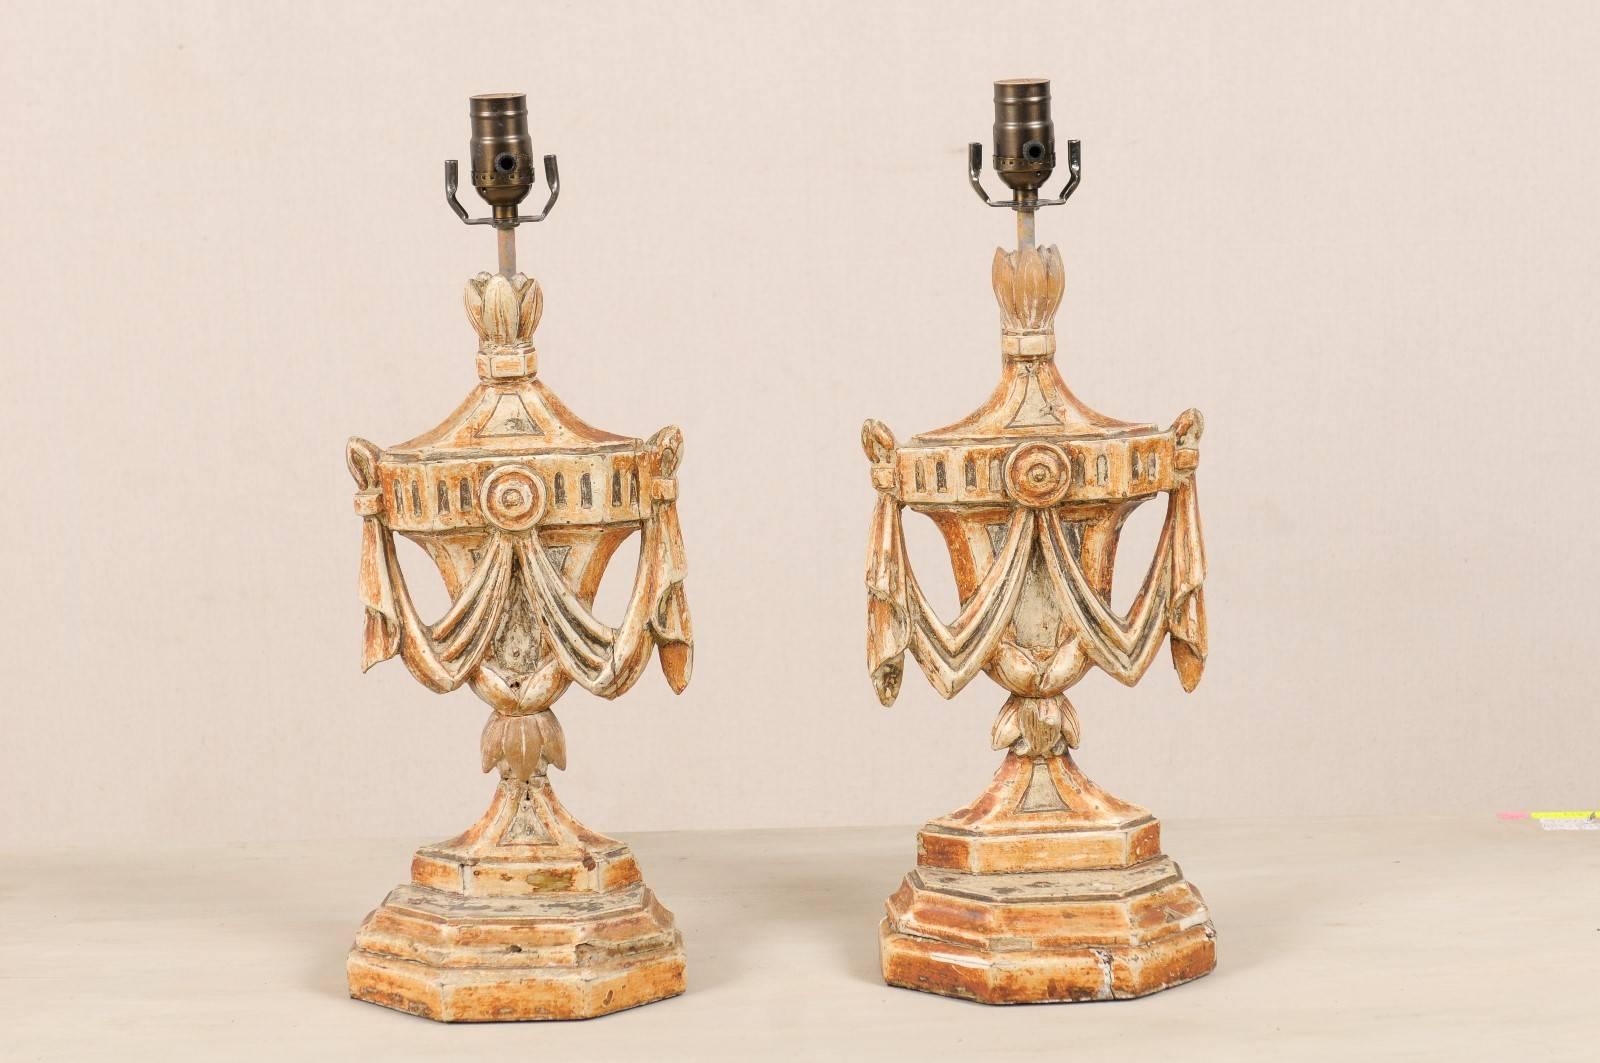 A pair of Italian painted and carved wood table lamps from the early 20th century. This pair of table lamps features its original paint and is adorned with urn and swag carvings. The primary color of this pair is orange and cream with a little brown